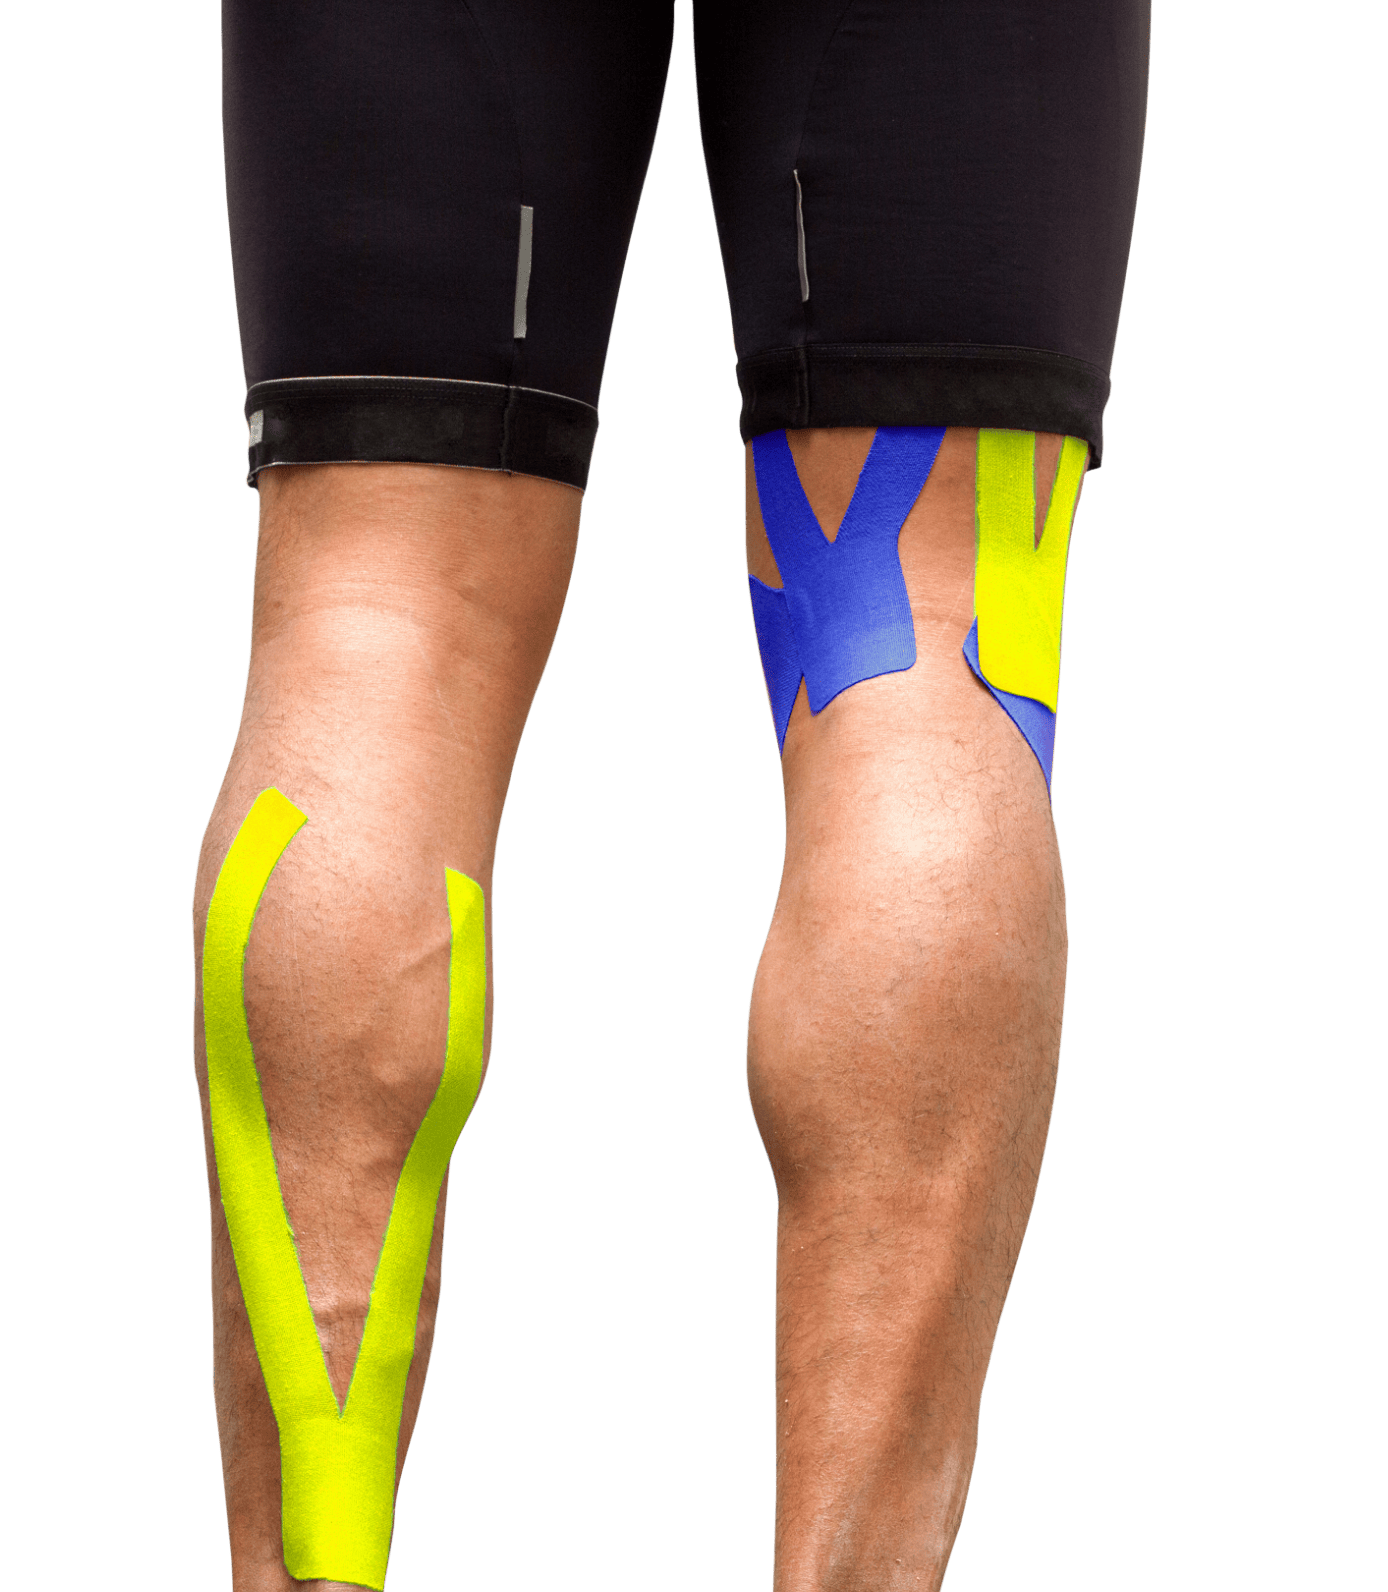 Legs with athletic tape